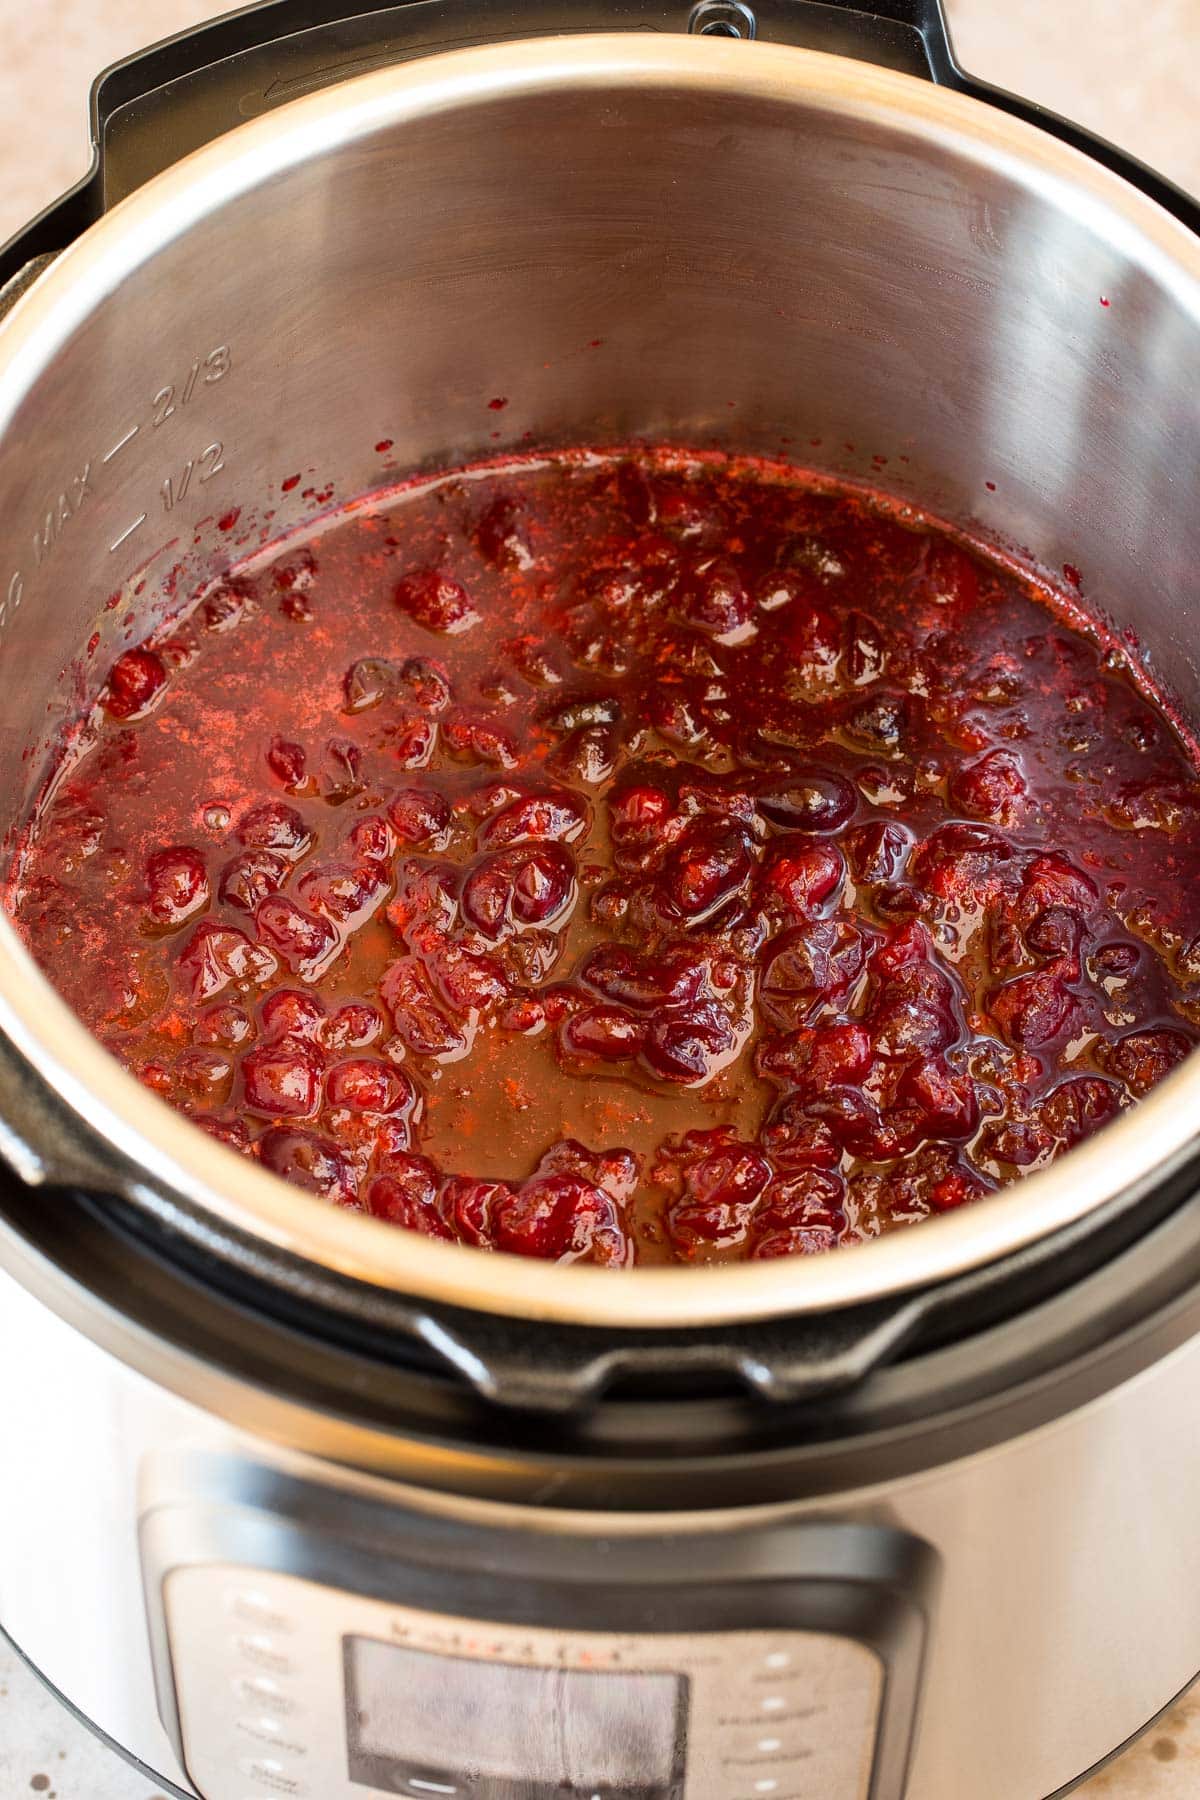 Cranberry sauce inside of a pressure cooker.